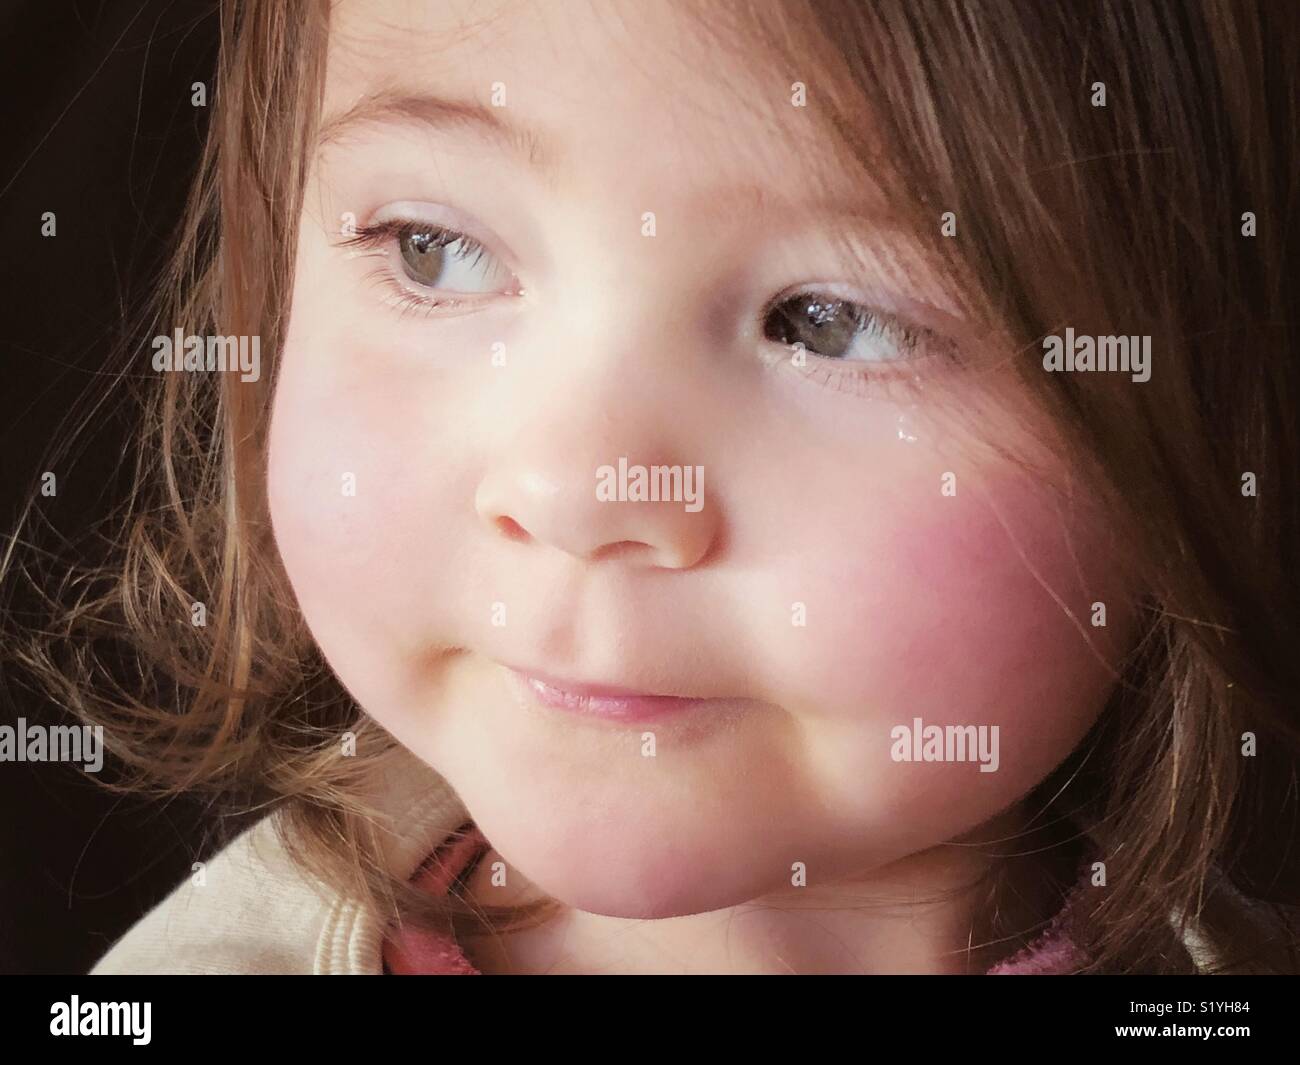 Closeup portrait of 2 year old girl looking to the side with single tear below one eye Stock Photo